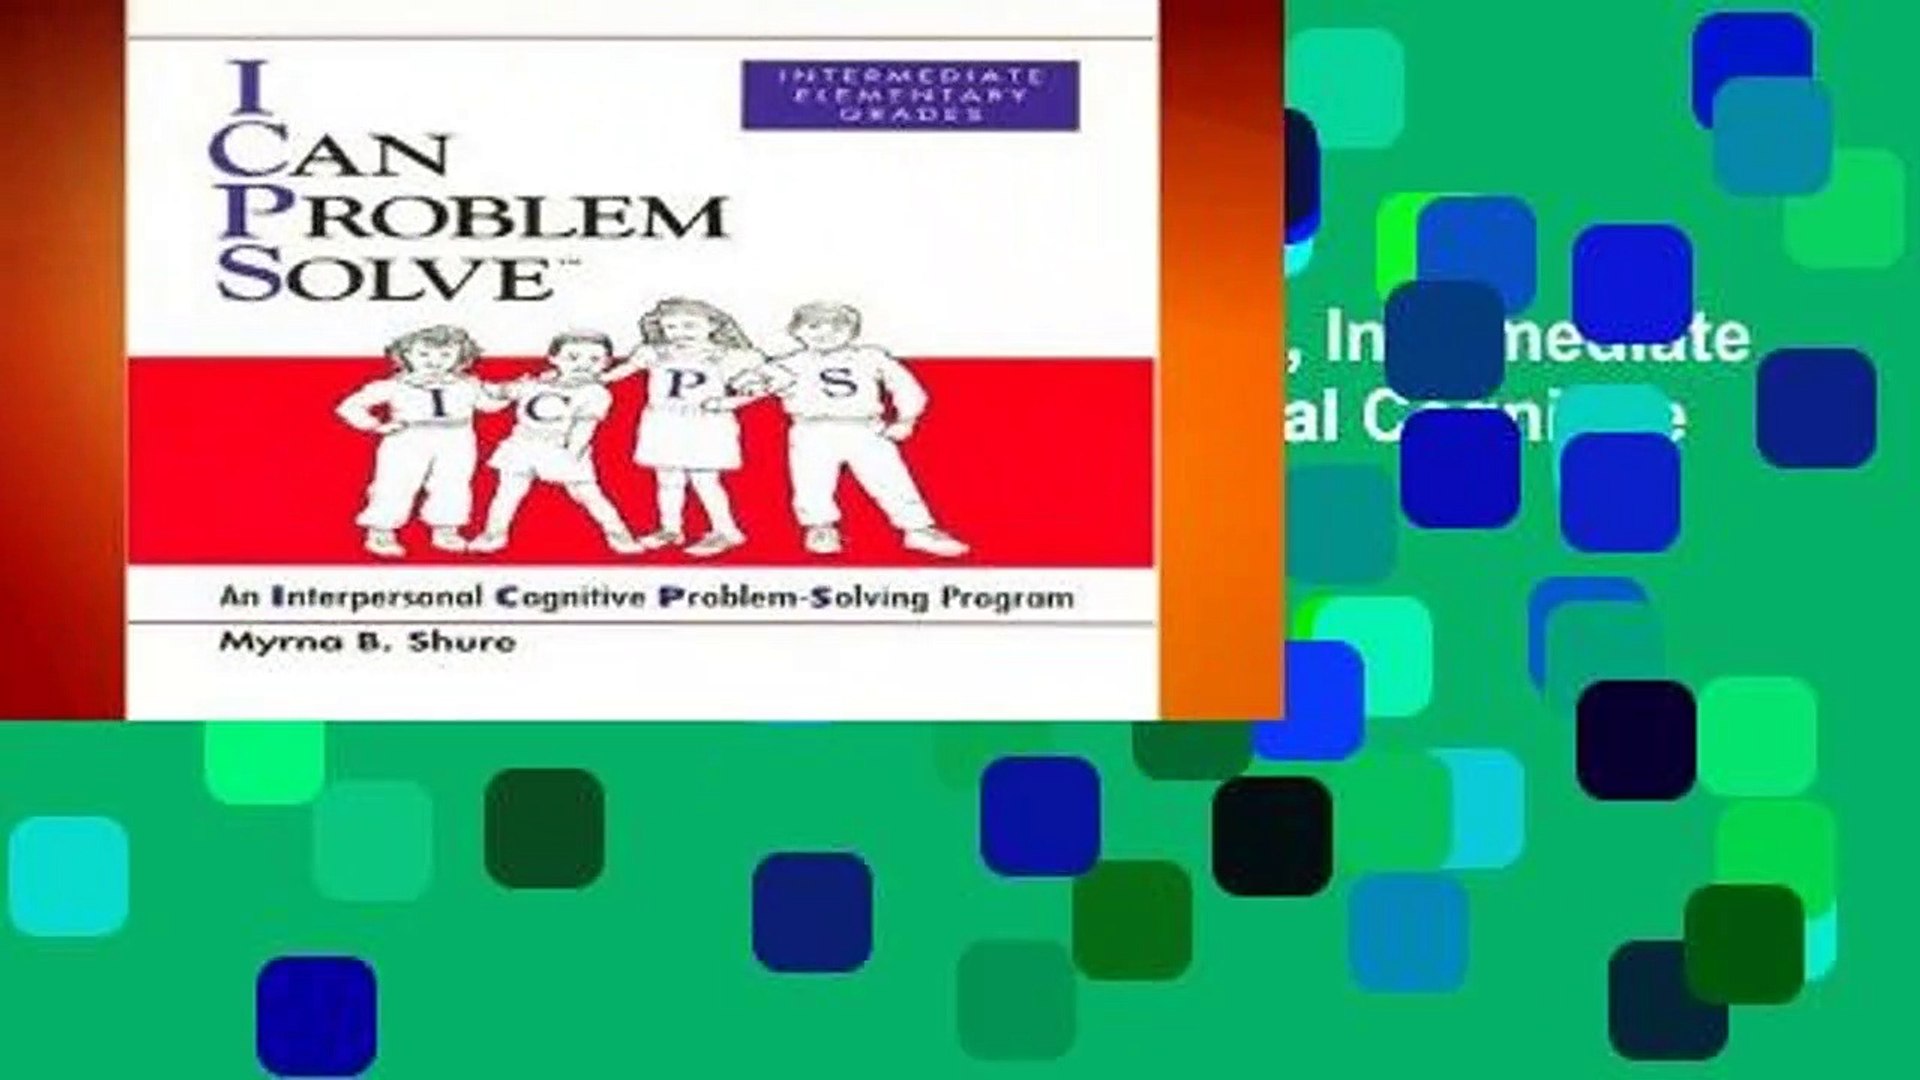 R.E.A.D I Can Problem Solve [ICPS], Intermediate Elementary Grades: An Interpersonal Cognitive